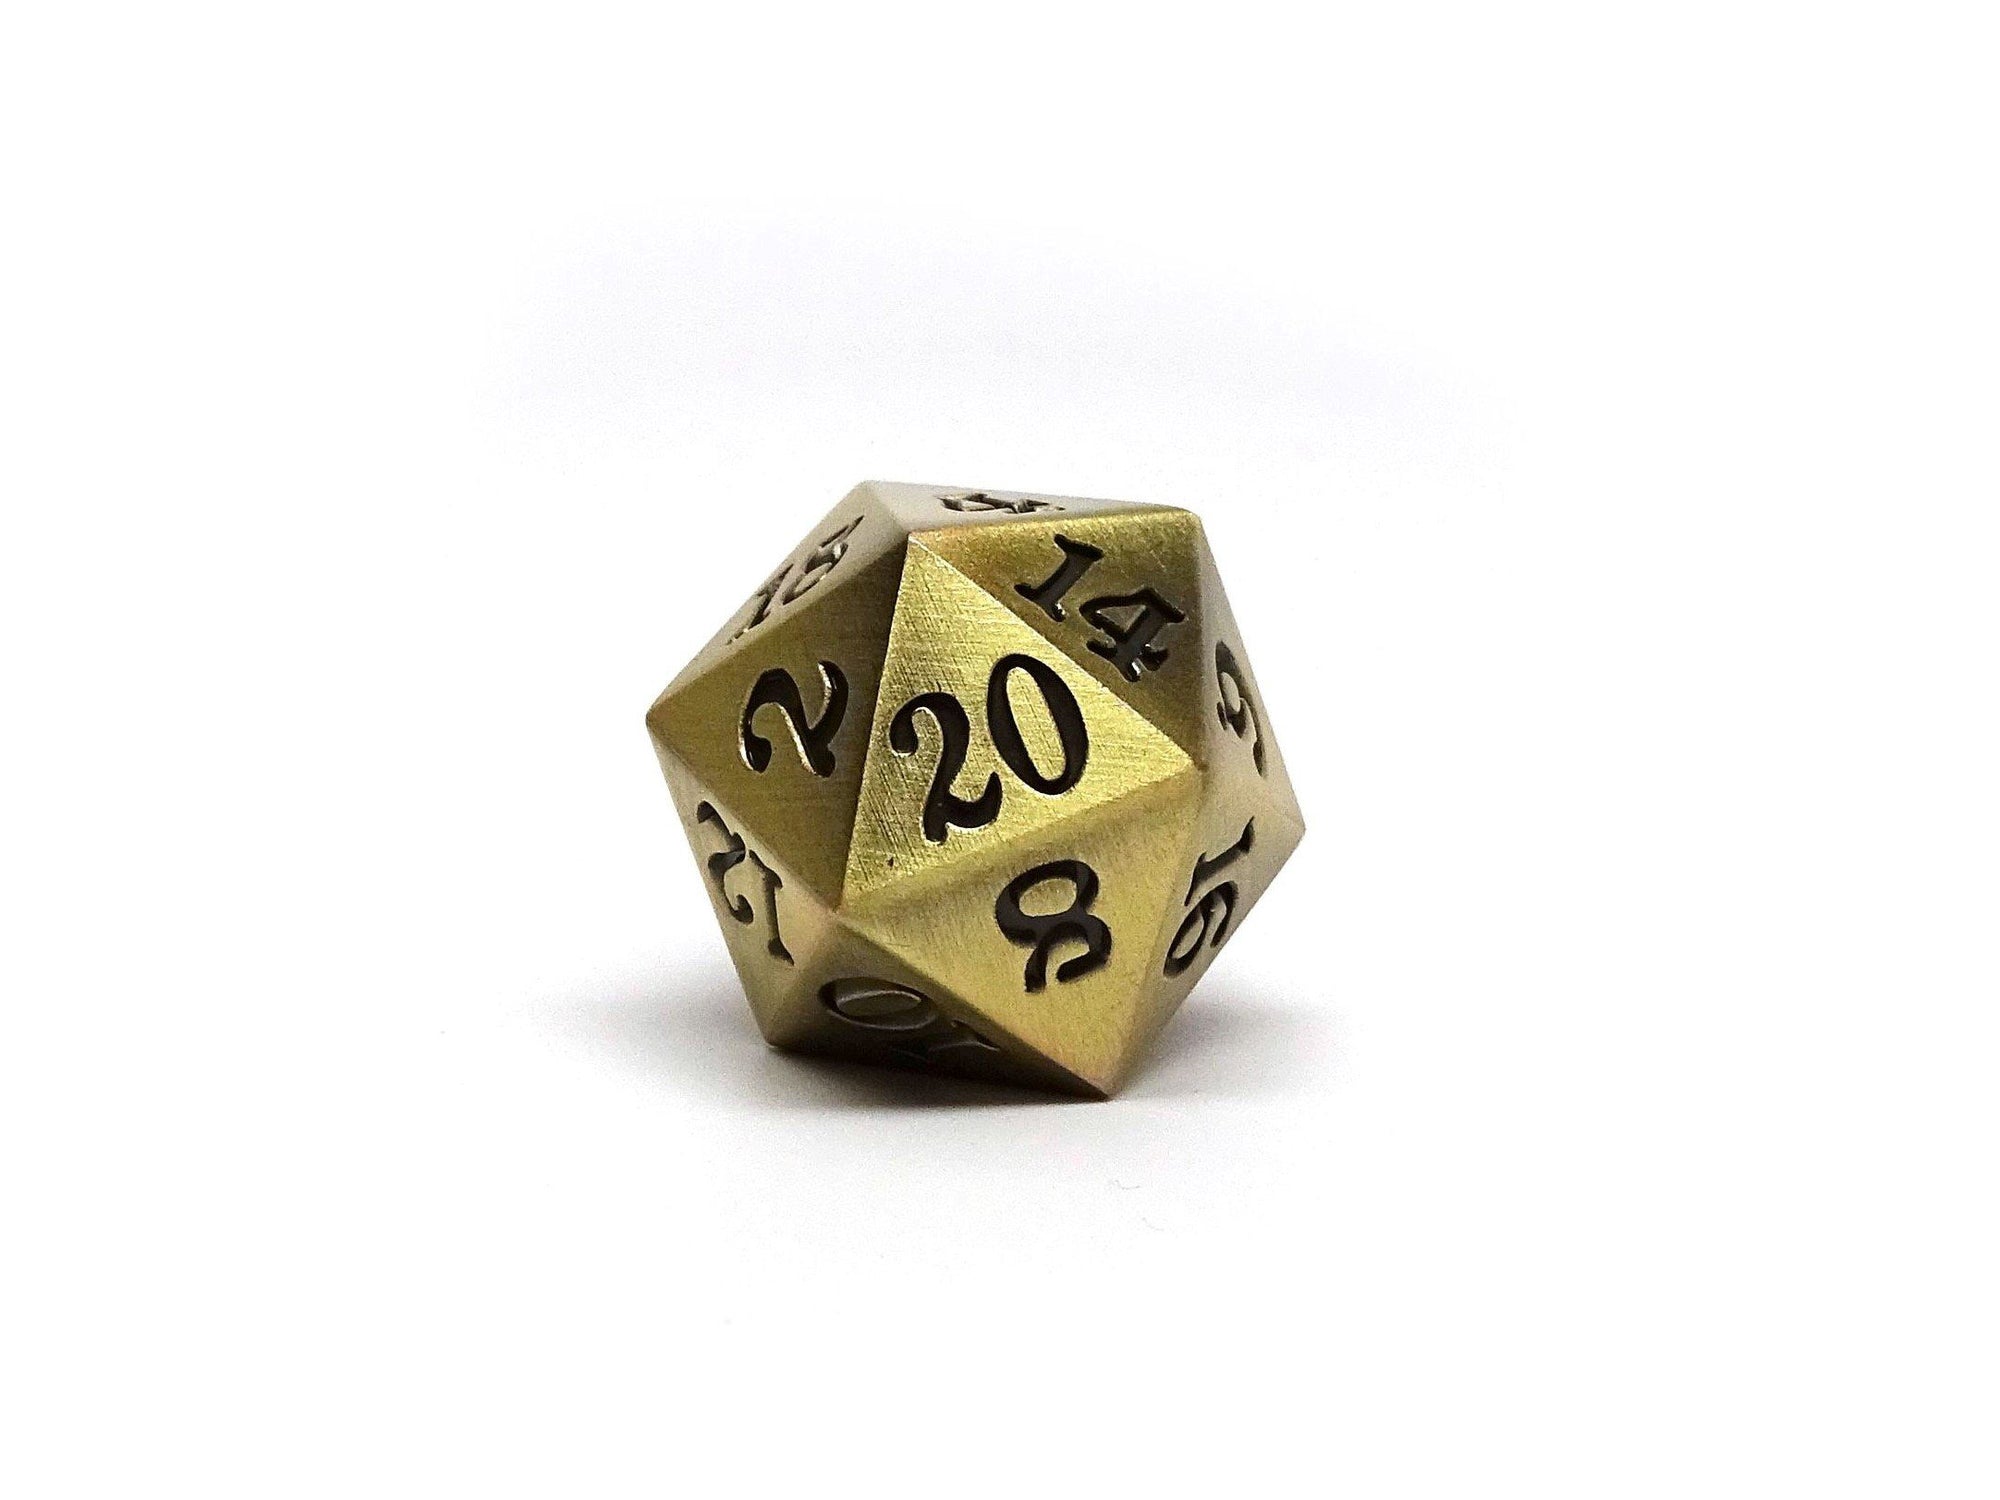 A Roll Of The Dice by Bob Christopher